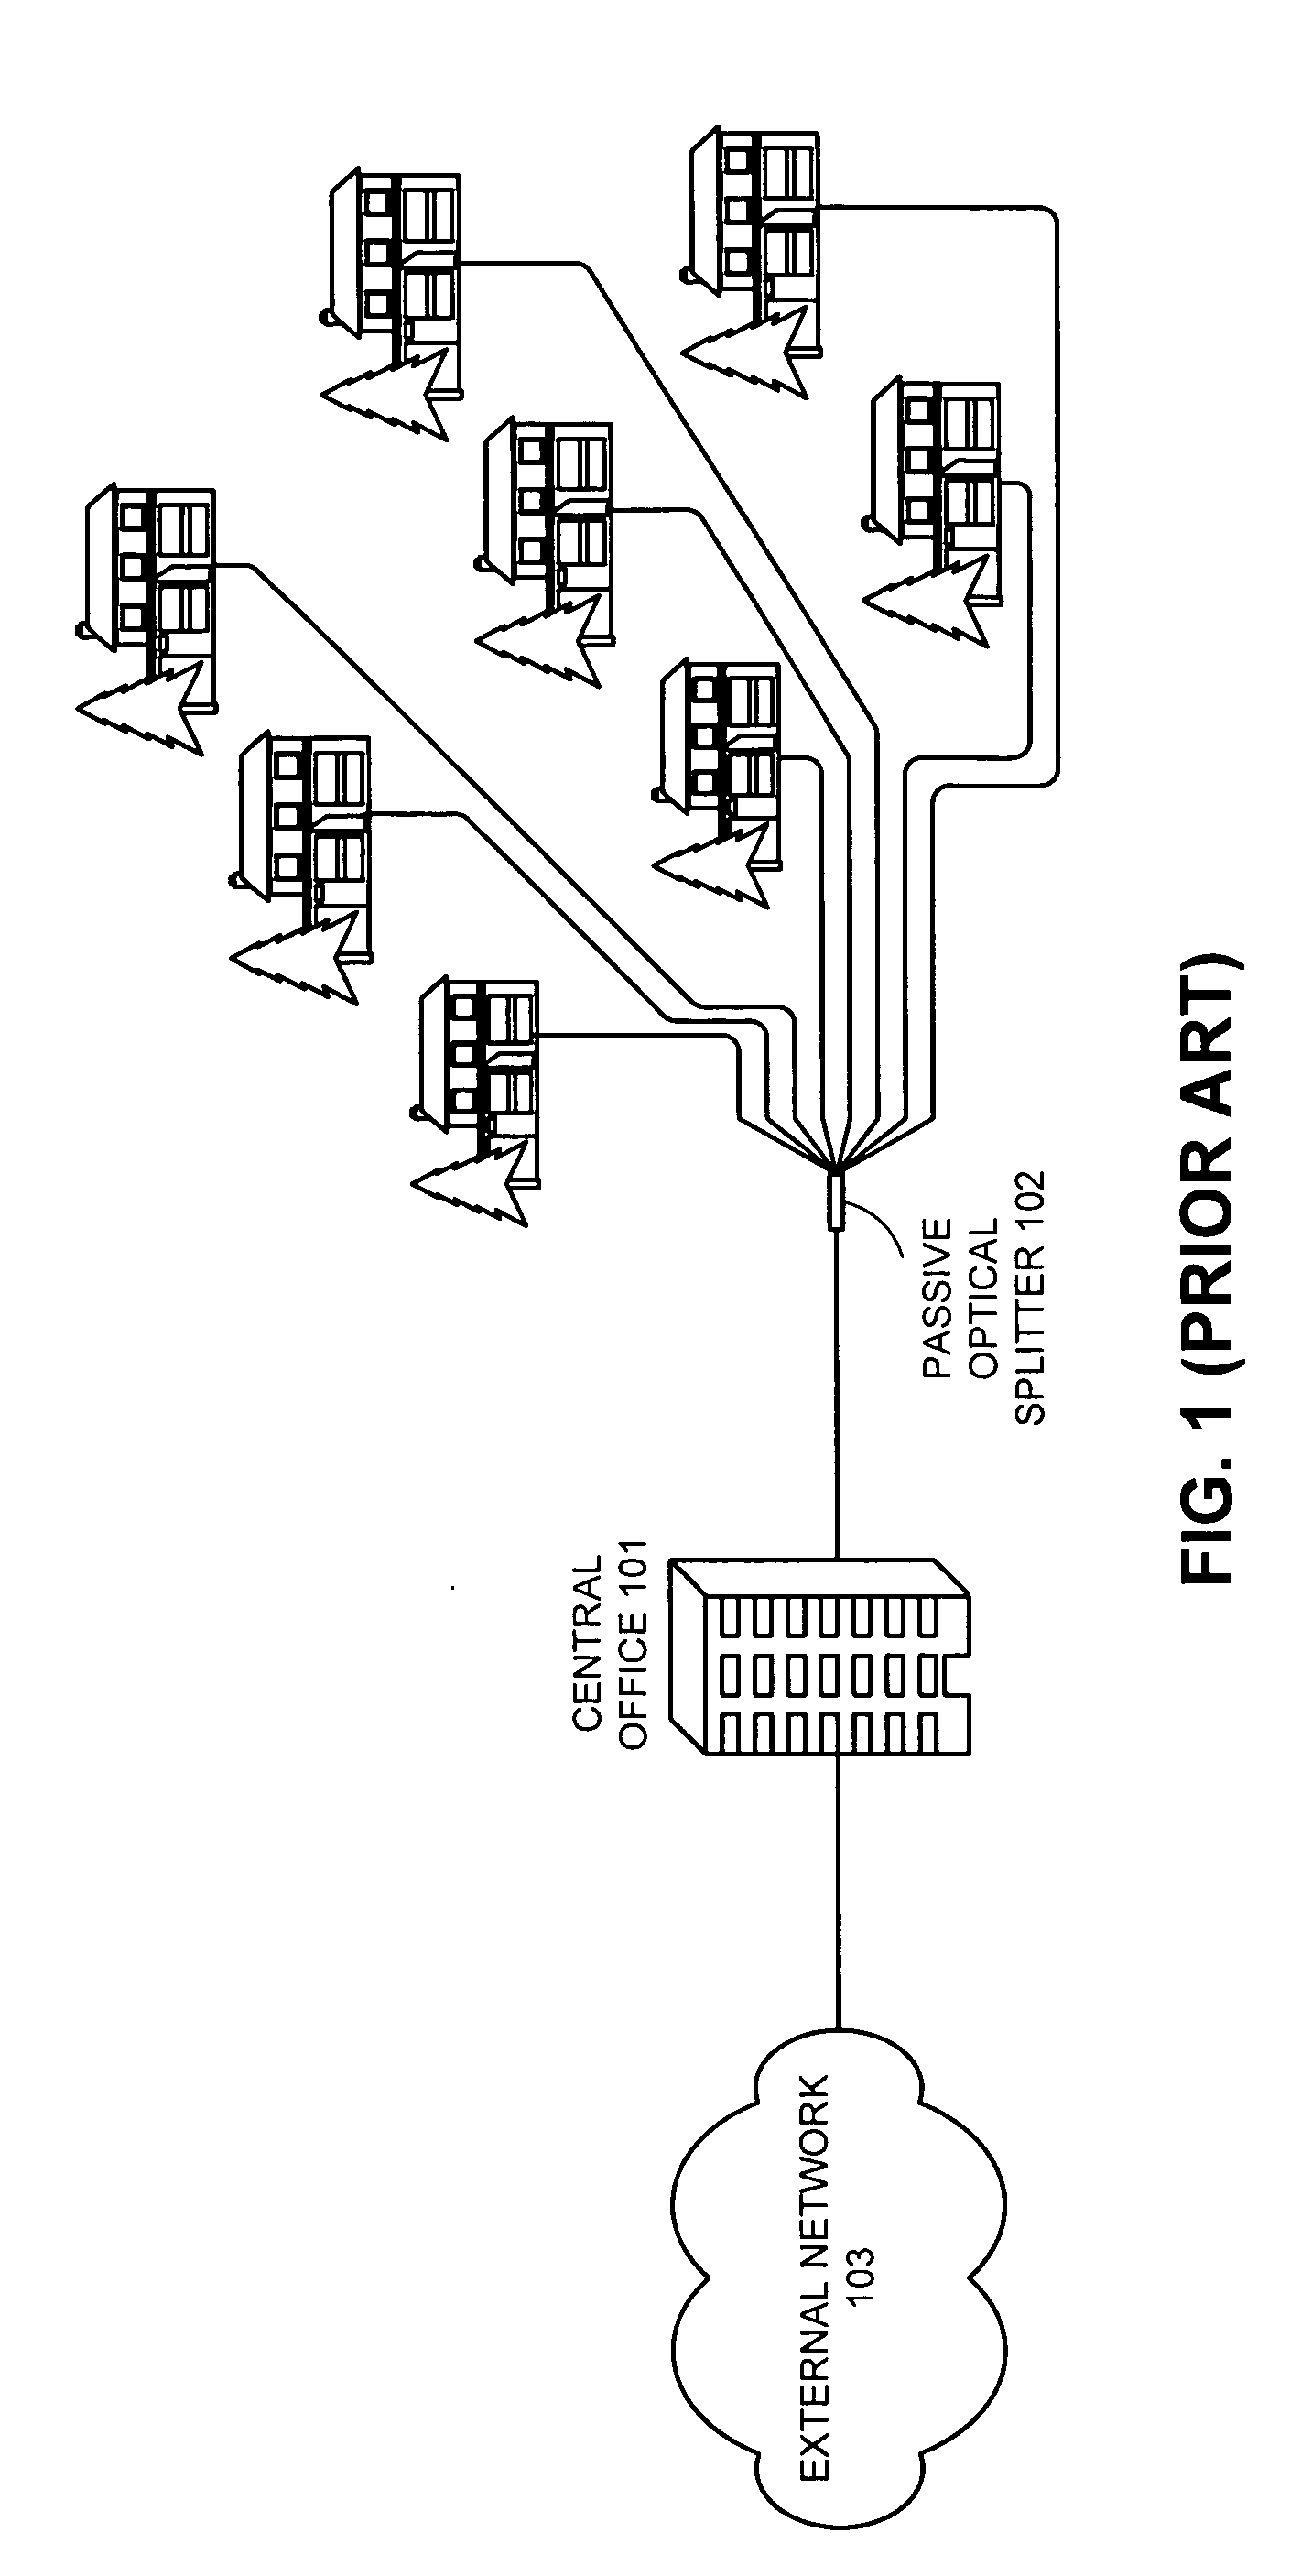 Method for data encryption in an ethernet passive optical network